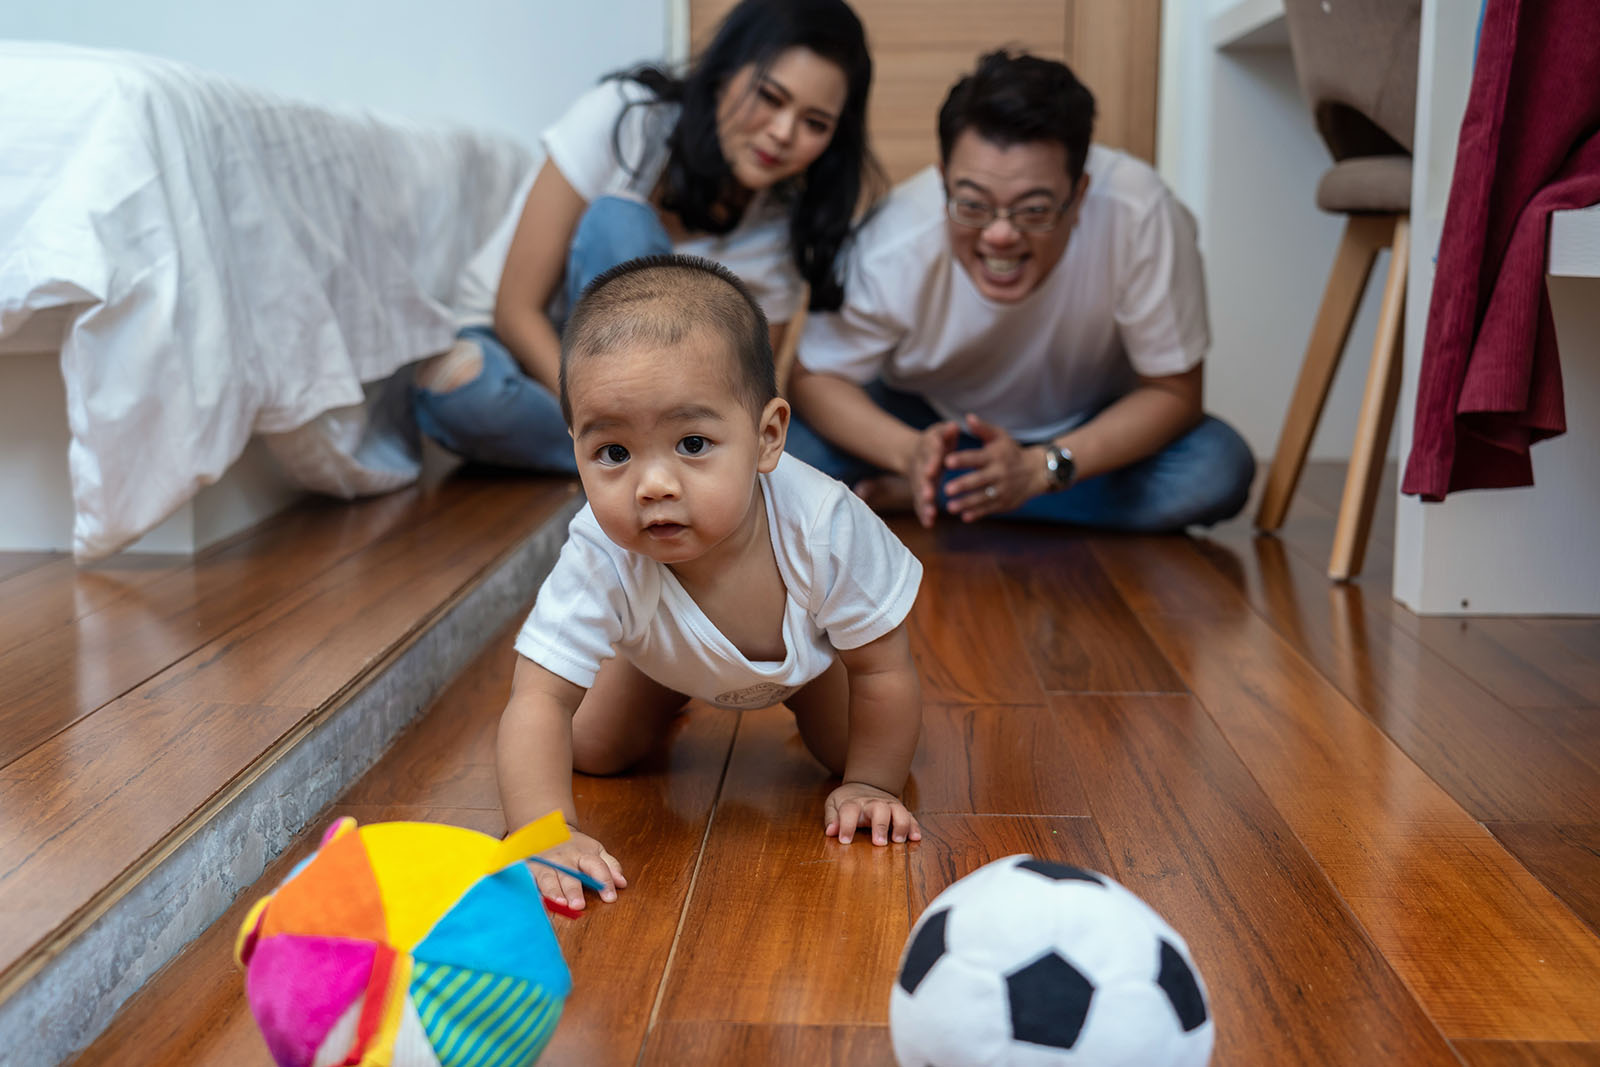 Baby boy crawls and plays with balls on the wooden floor, with father and mother smiling in the background.